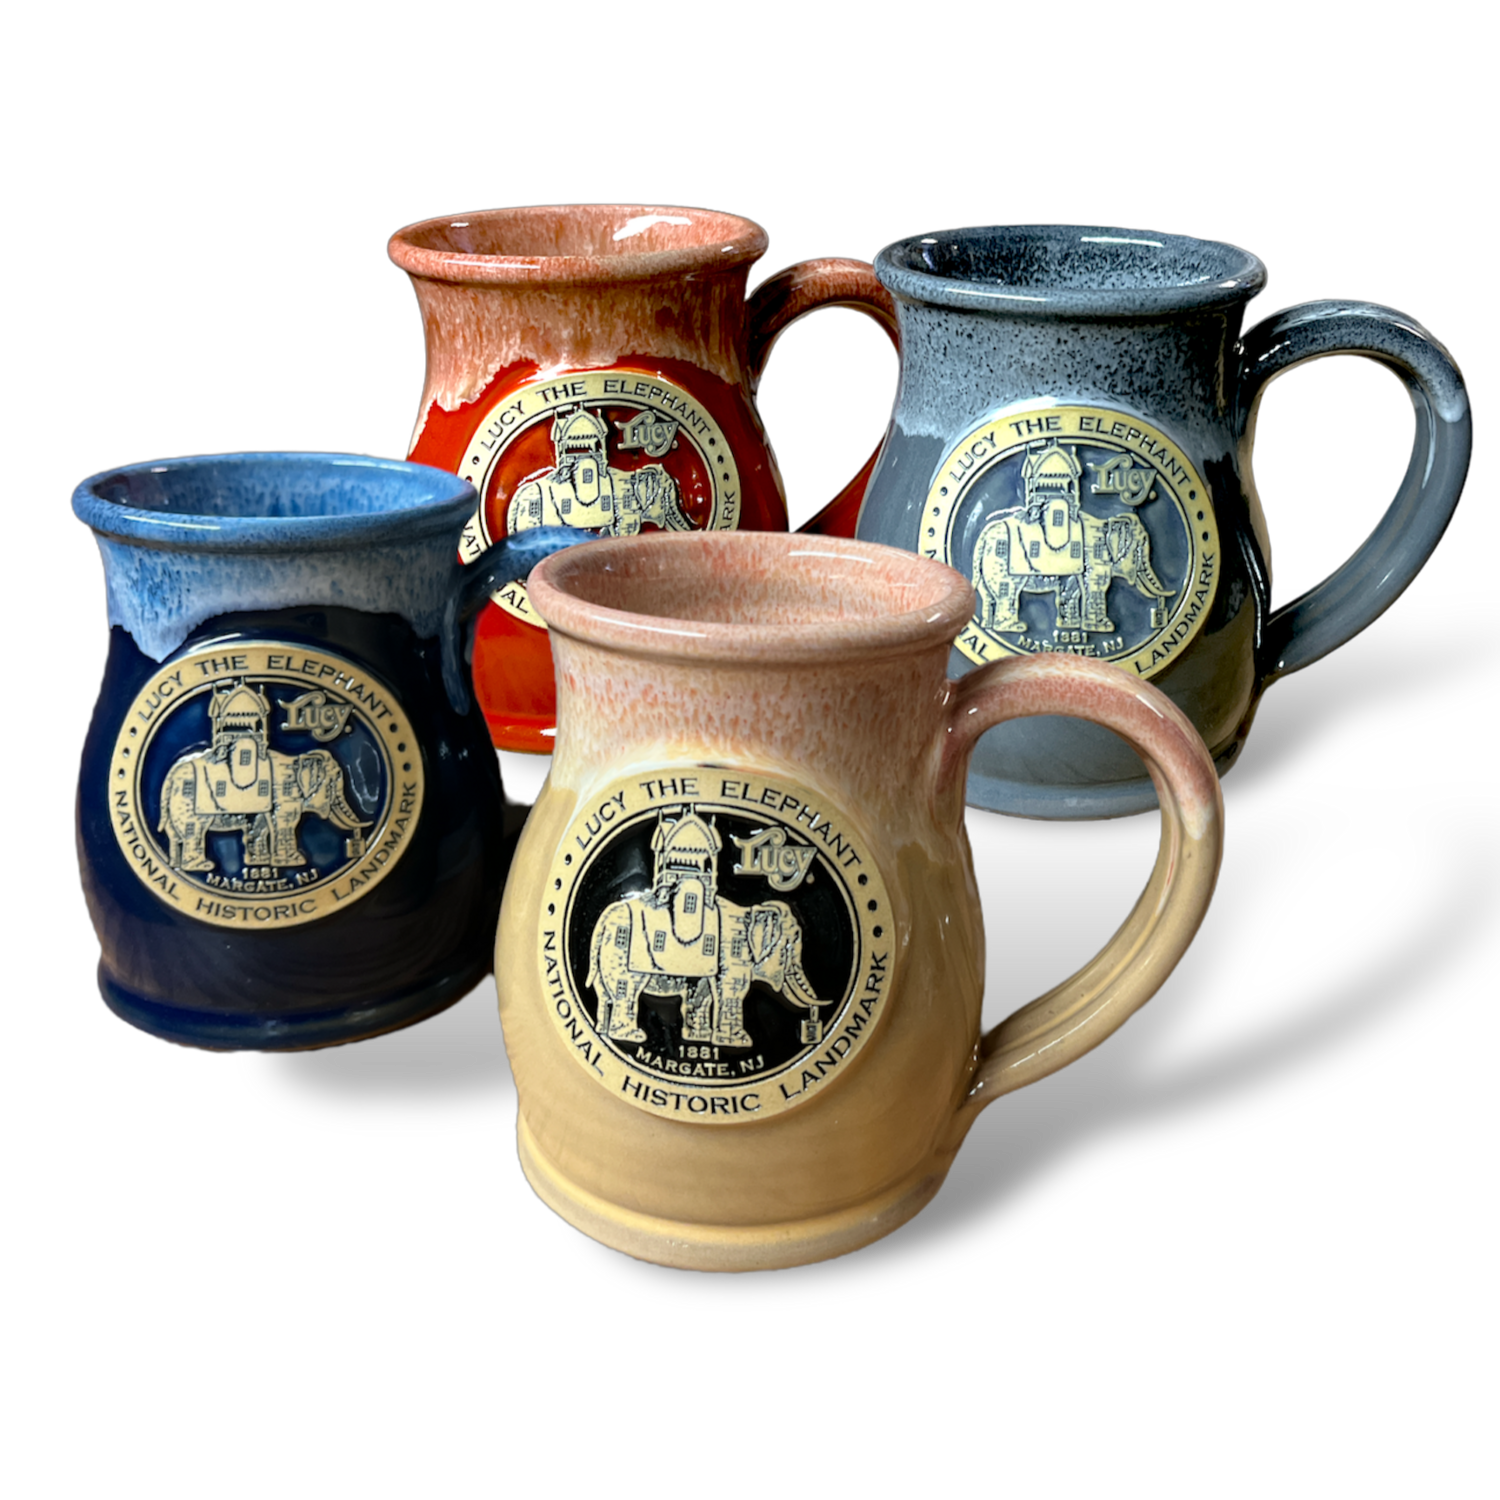 Lucy the Elephant Stoneware Mug by Deneen Pottery | Online Store - Lucy The  Elephant